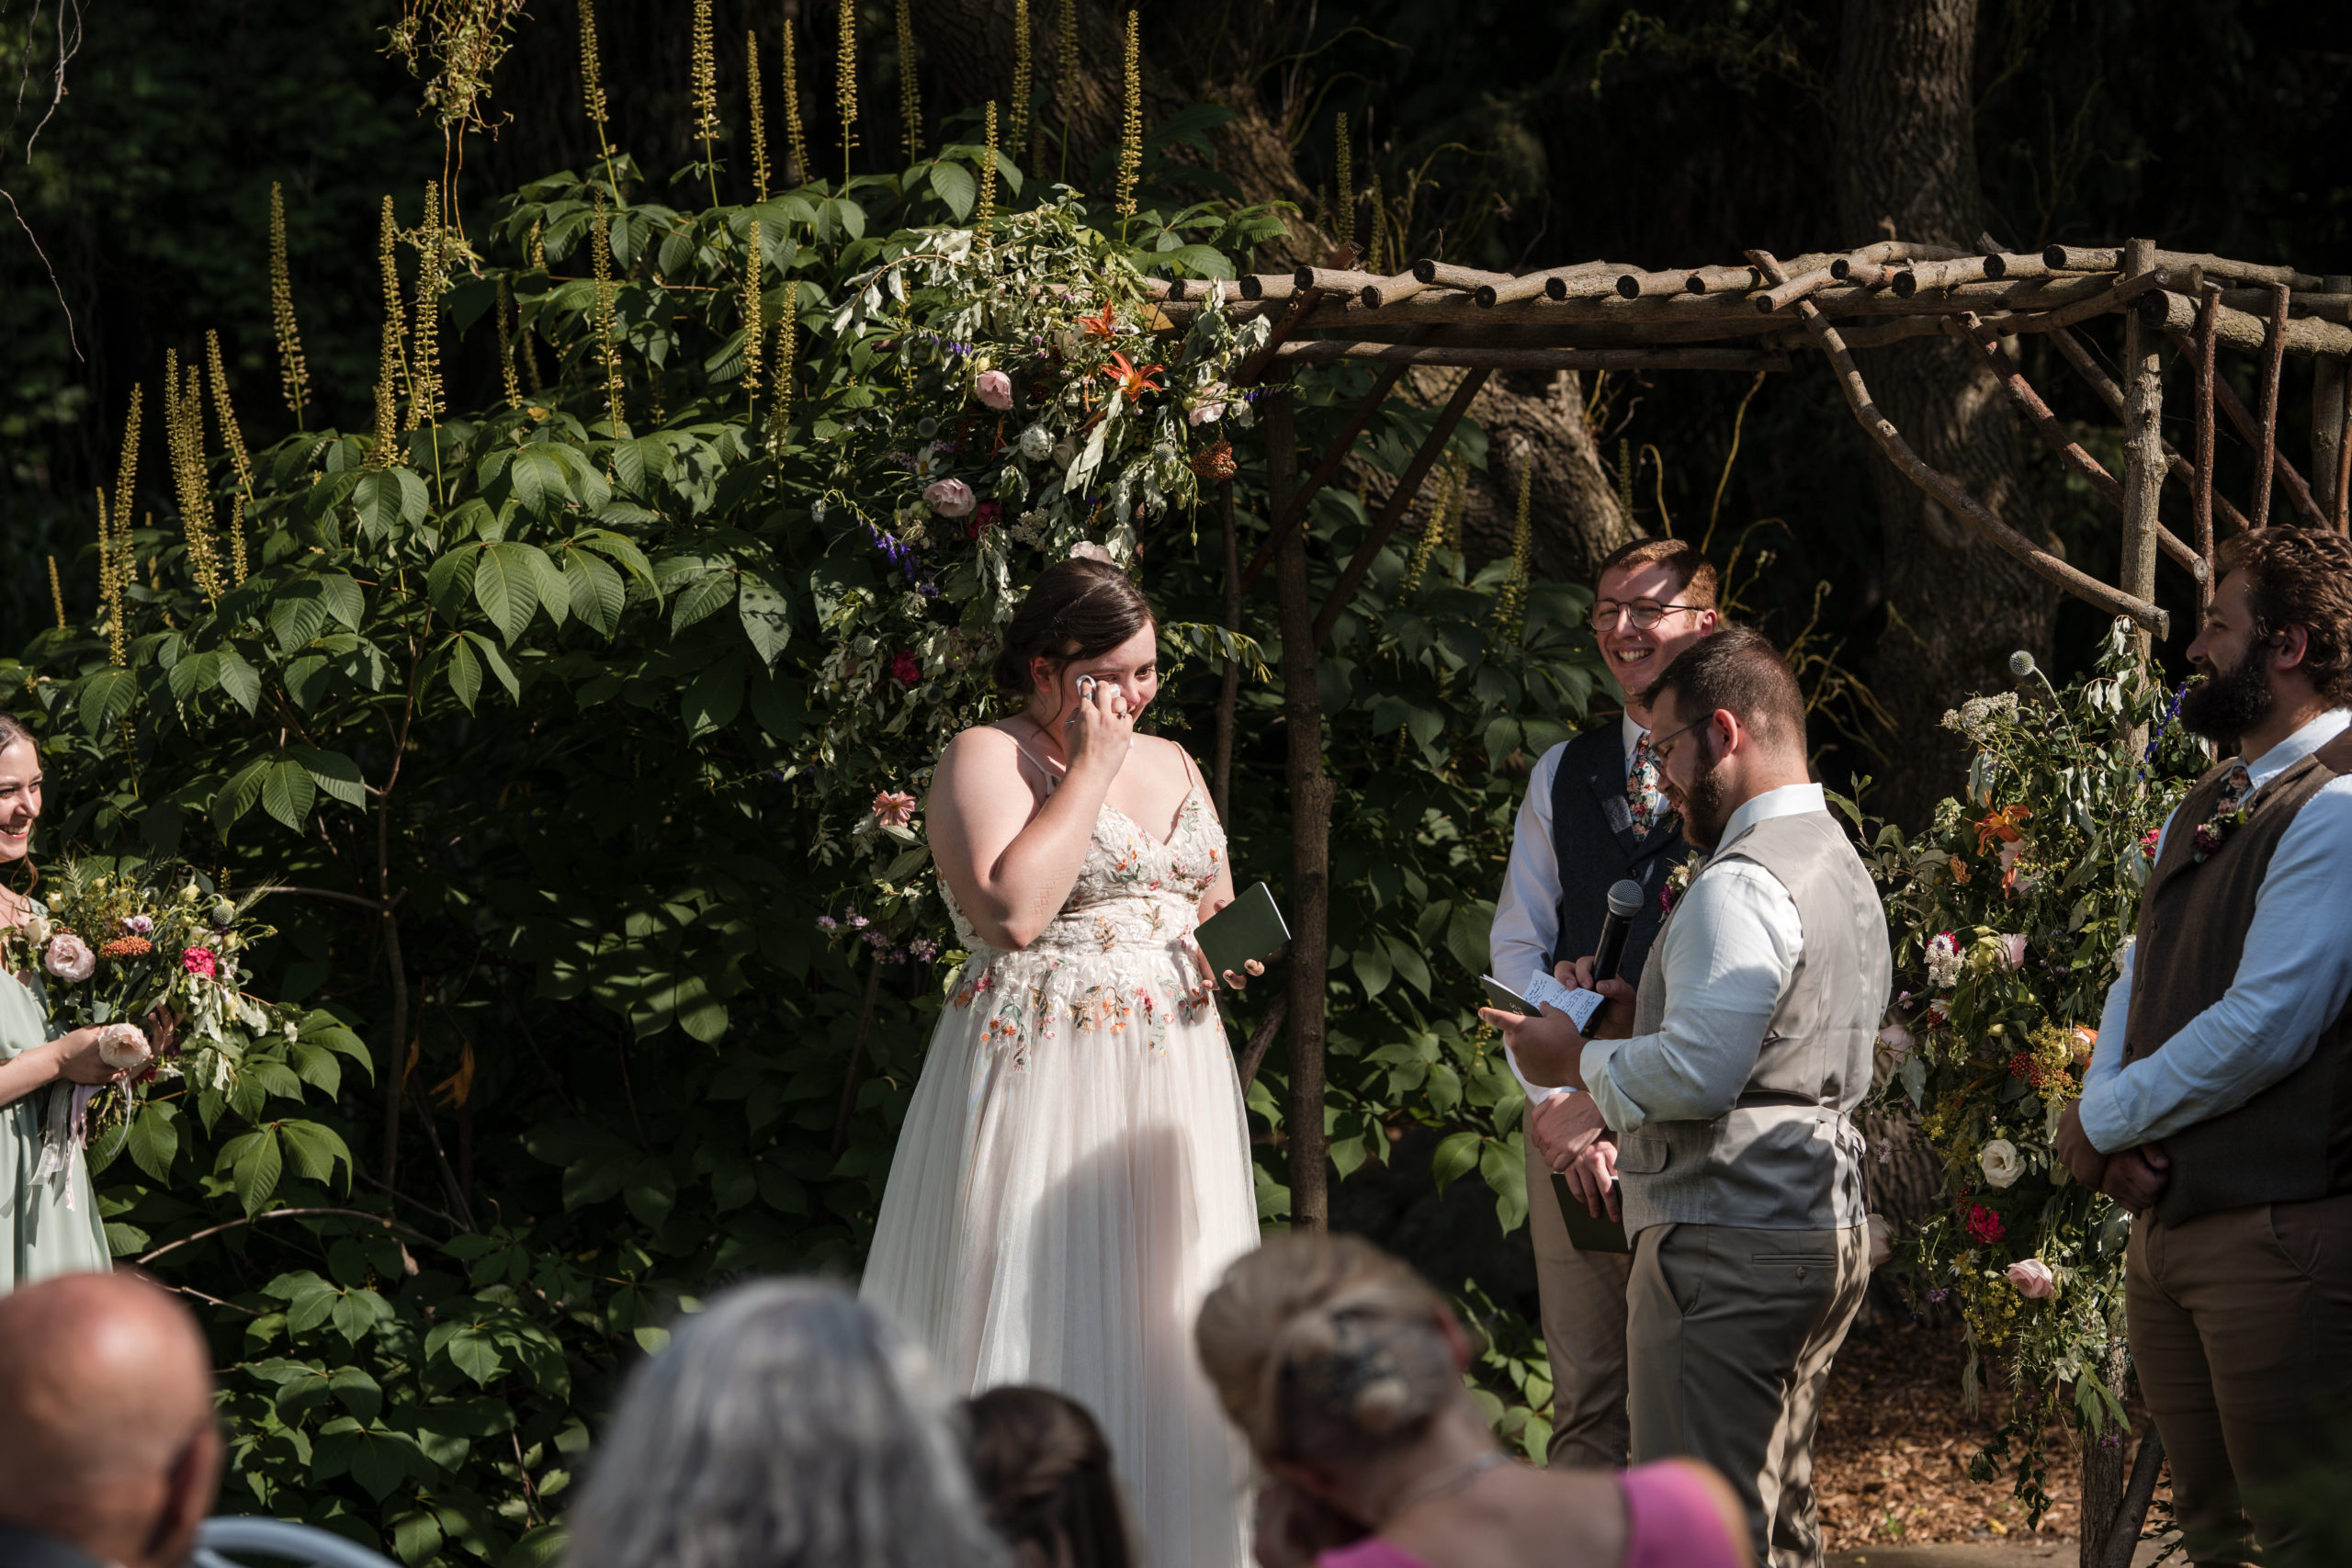 bride and groom exchanging wedding vows in a secluded garden ceremony.